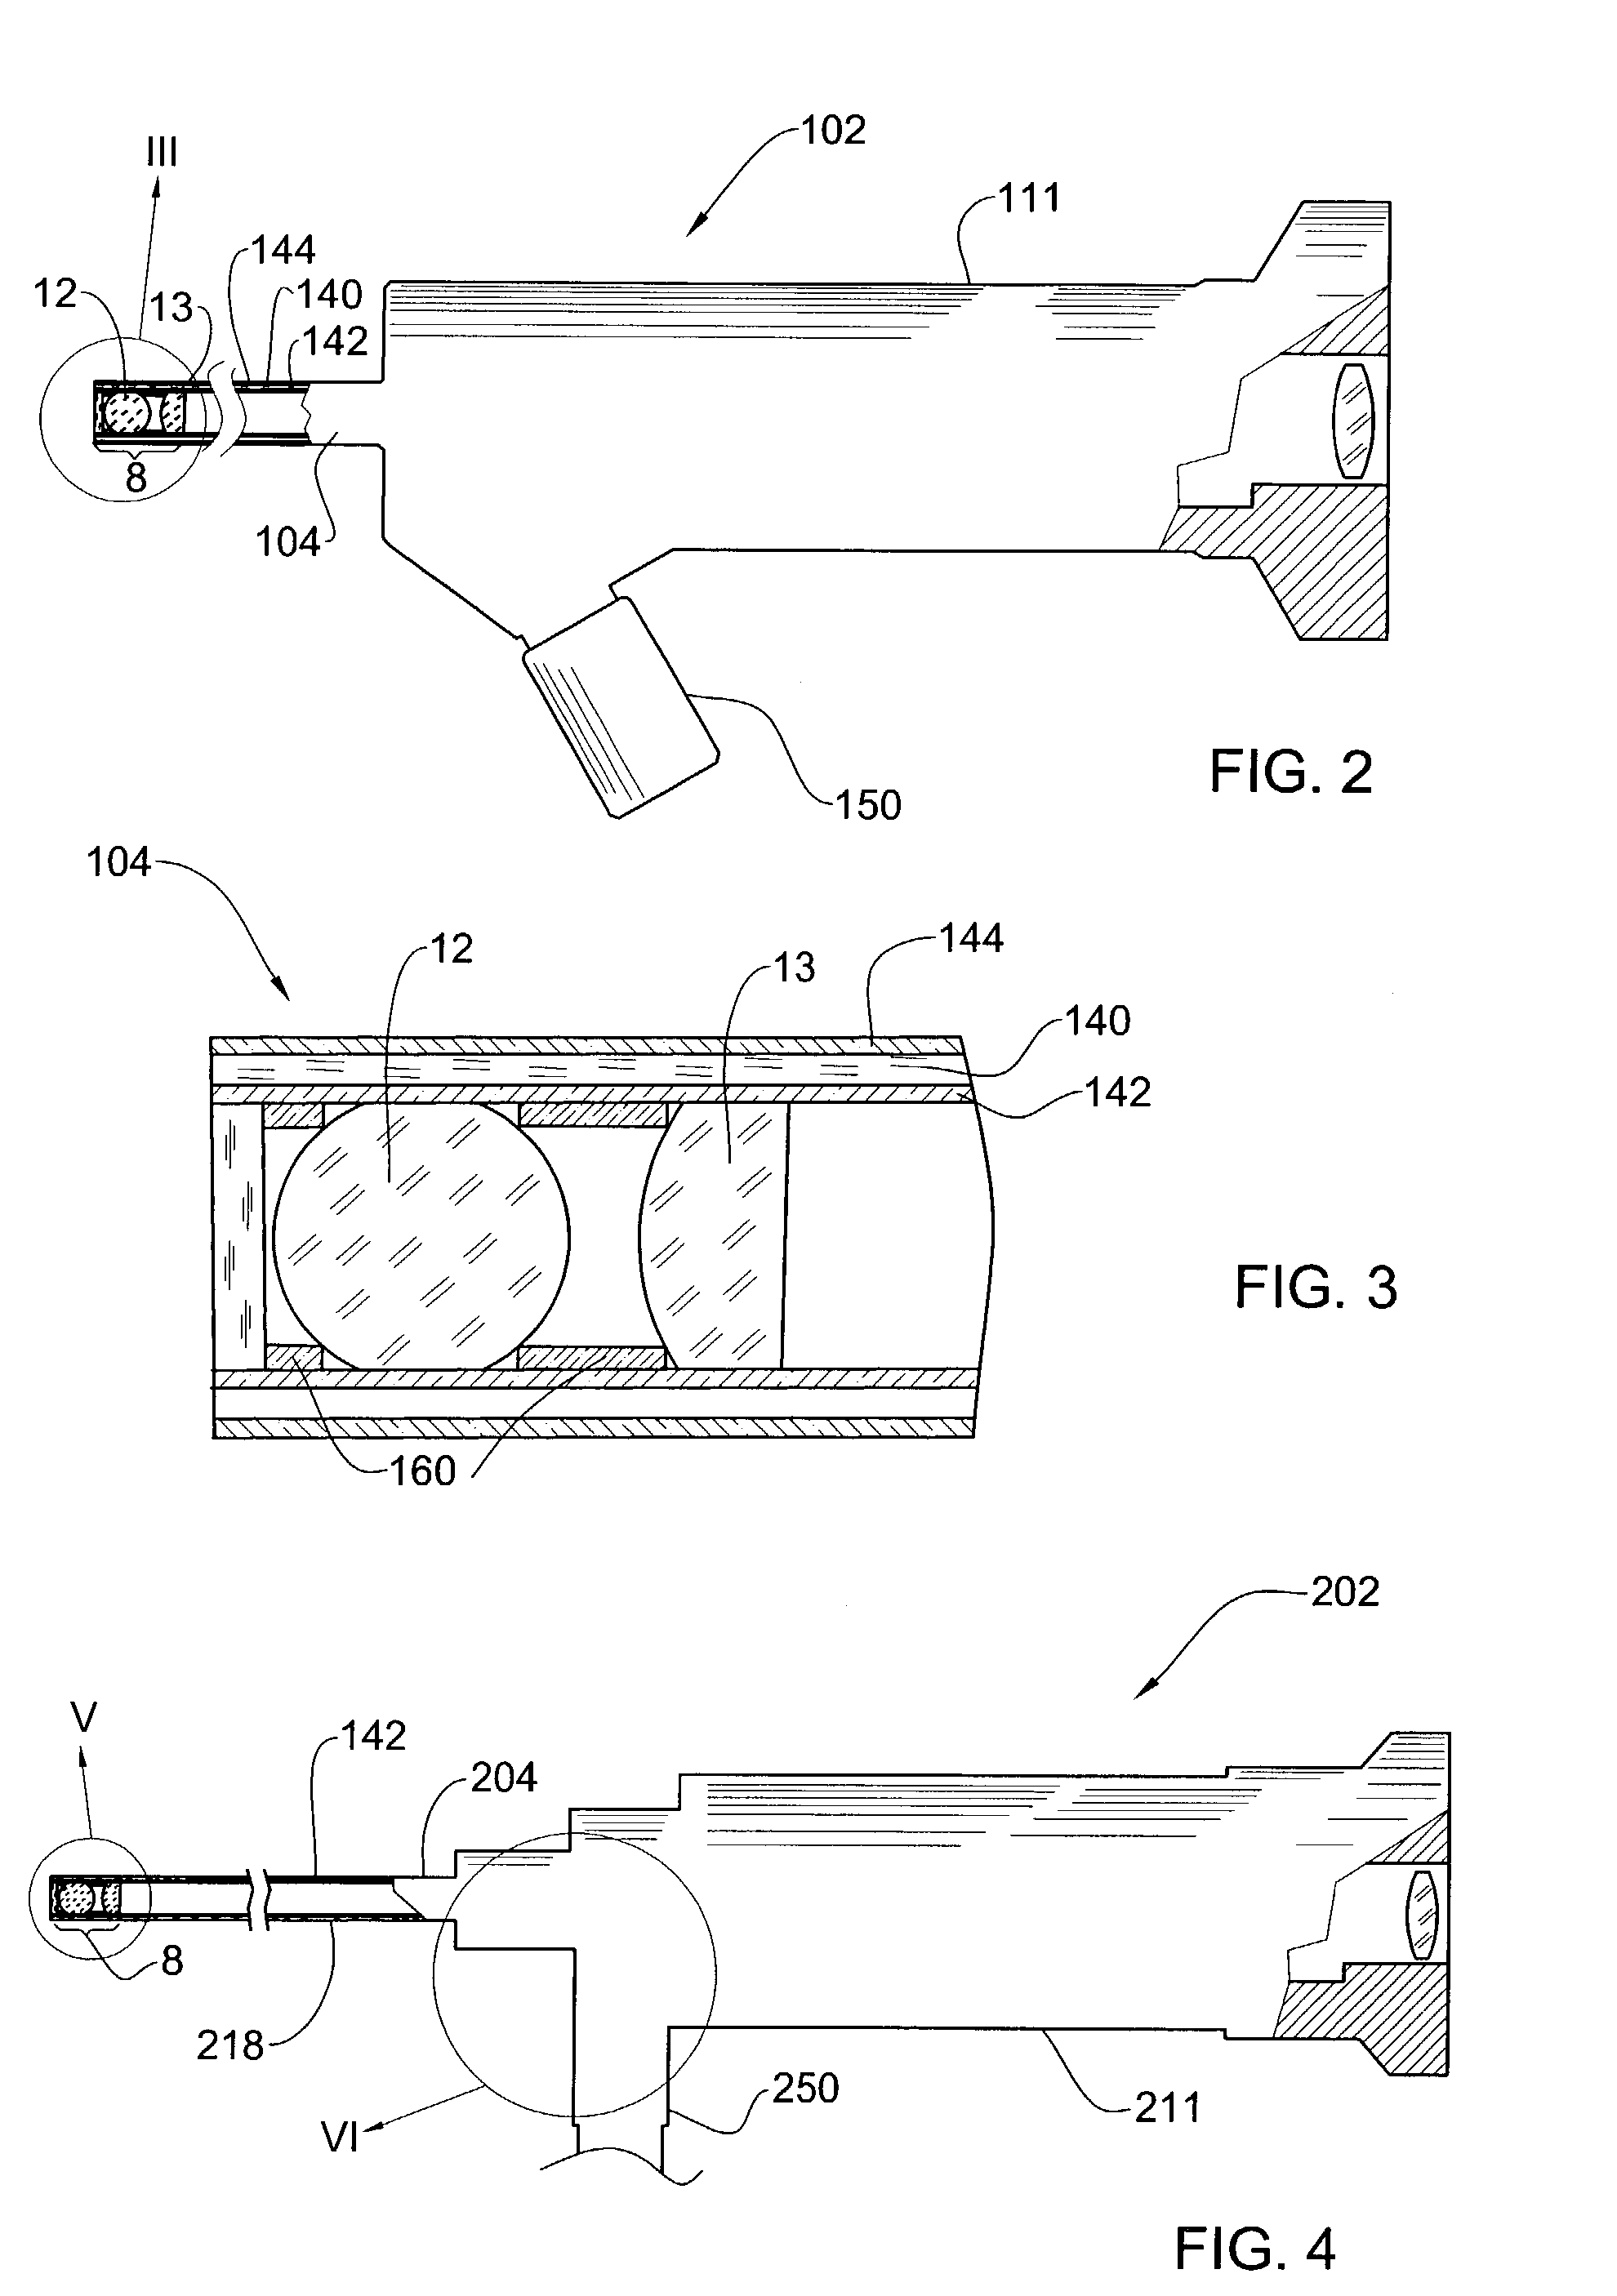 Optical device for viewing of cavernous and/or inaccessible spaces